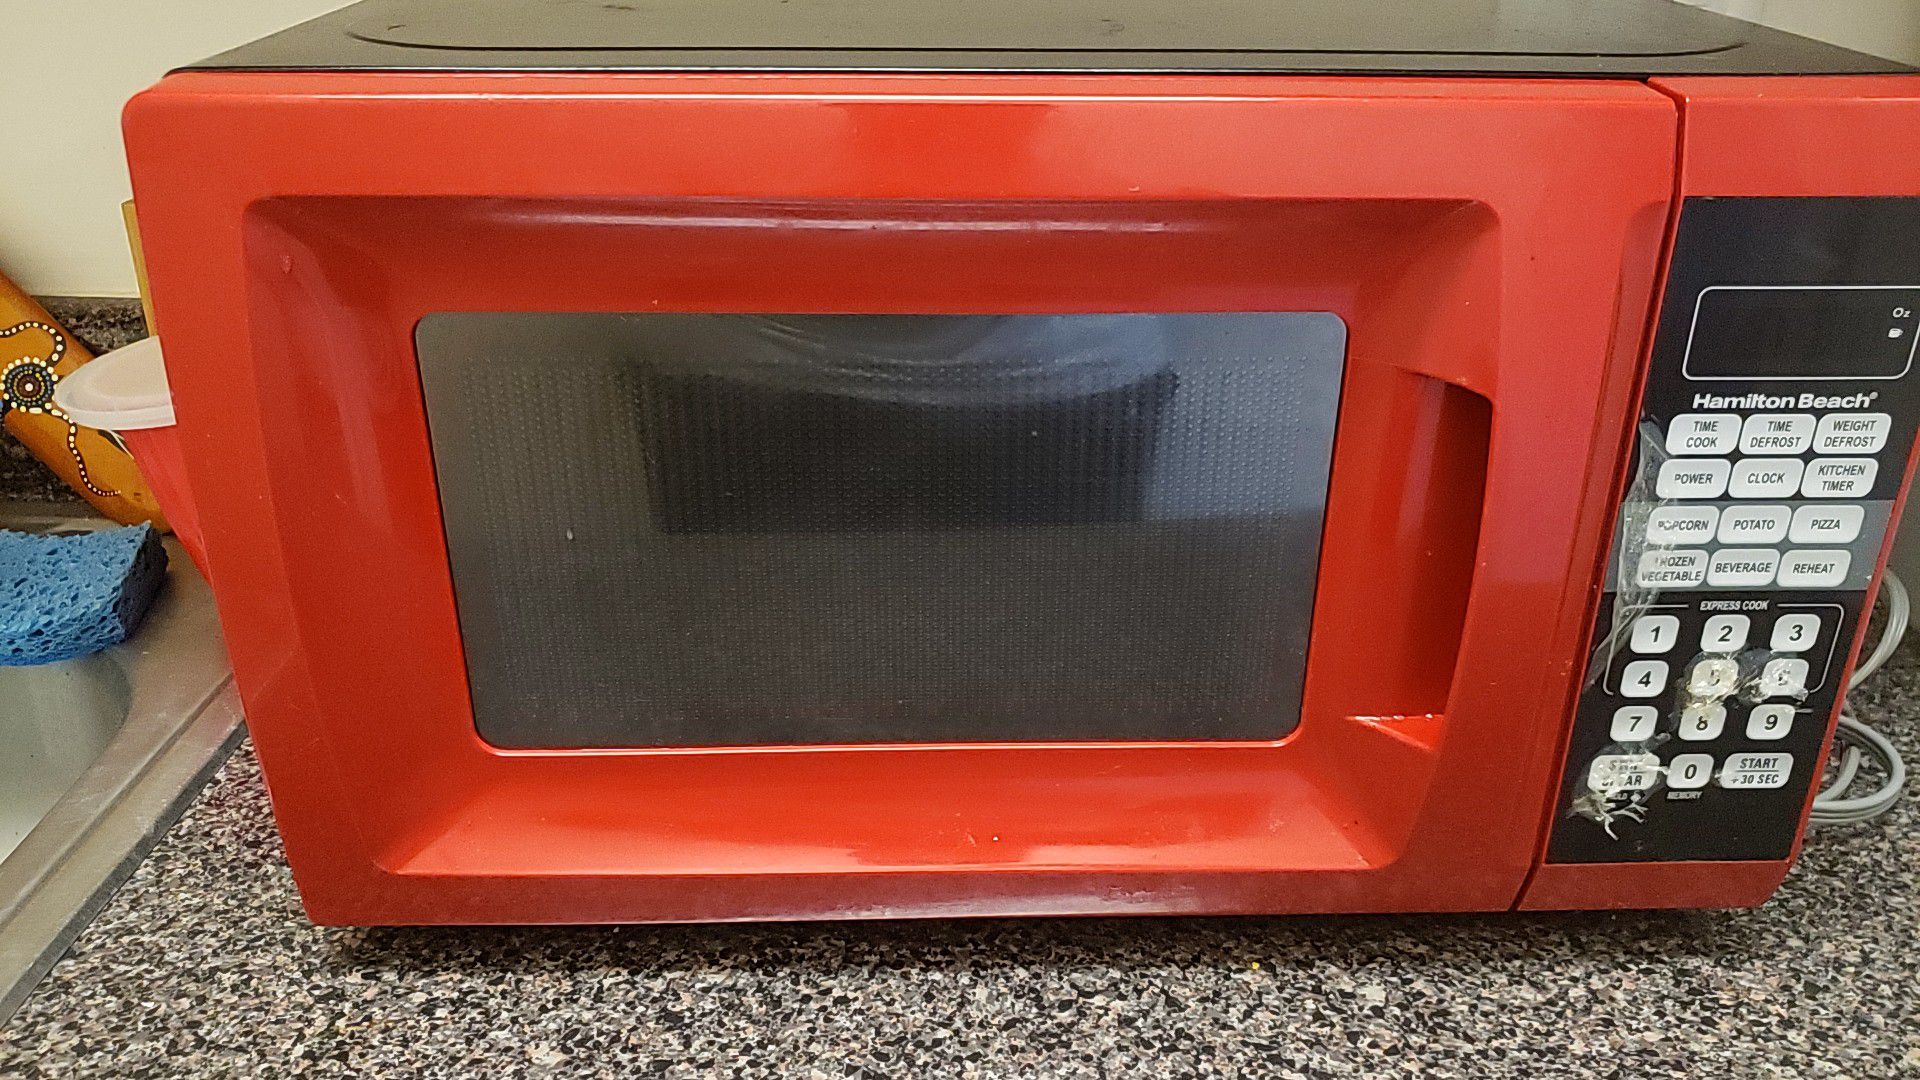 Microwave for sell